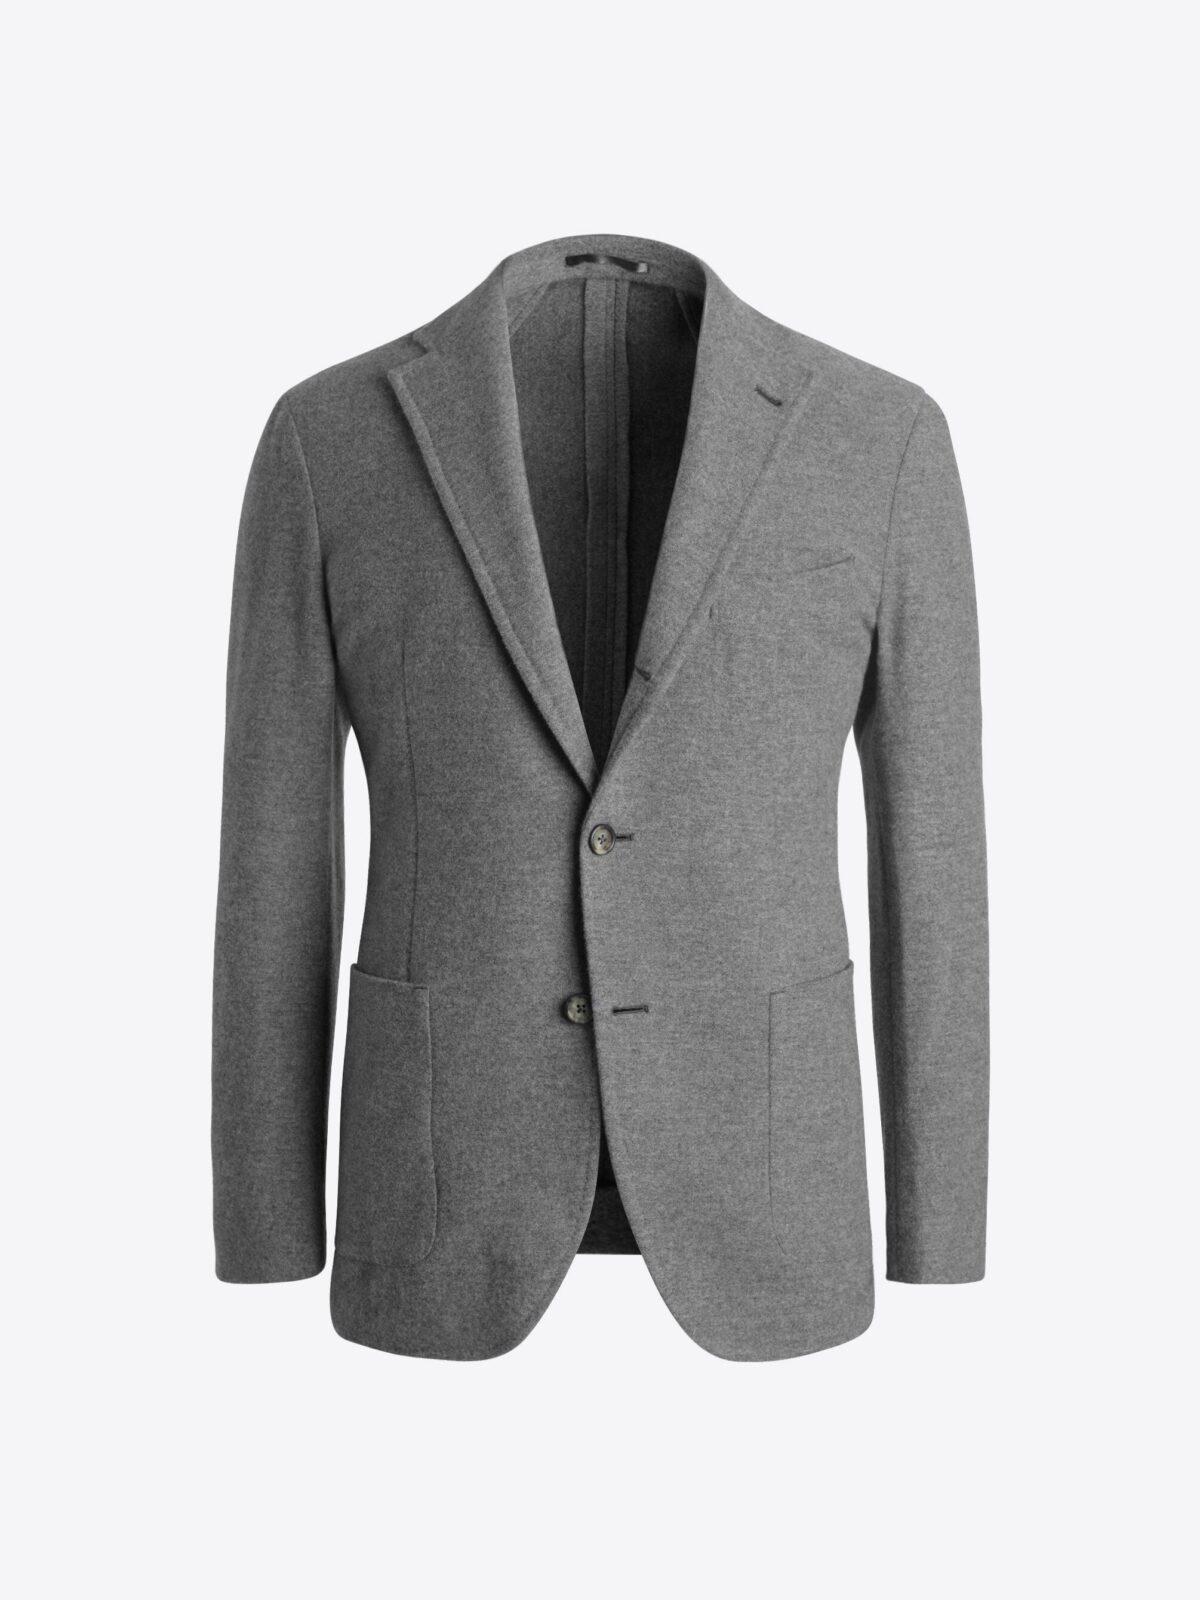 Grey Double Face Wool and Cashmere Jacket - Custom Fit Tailored Clothing